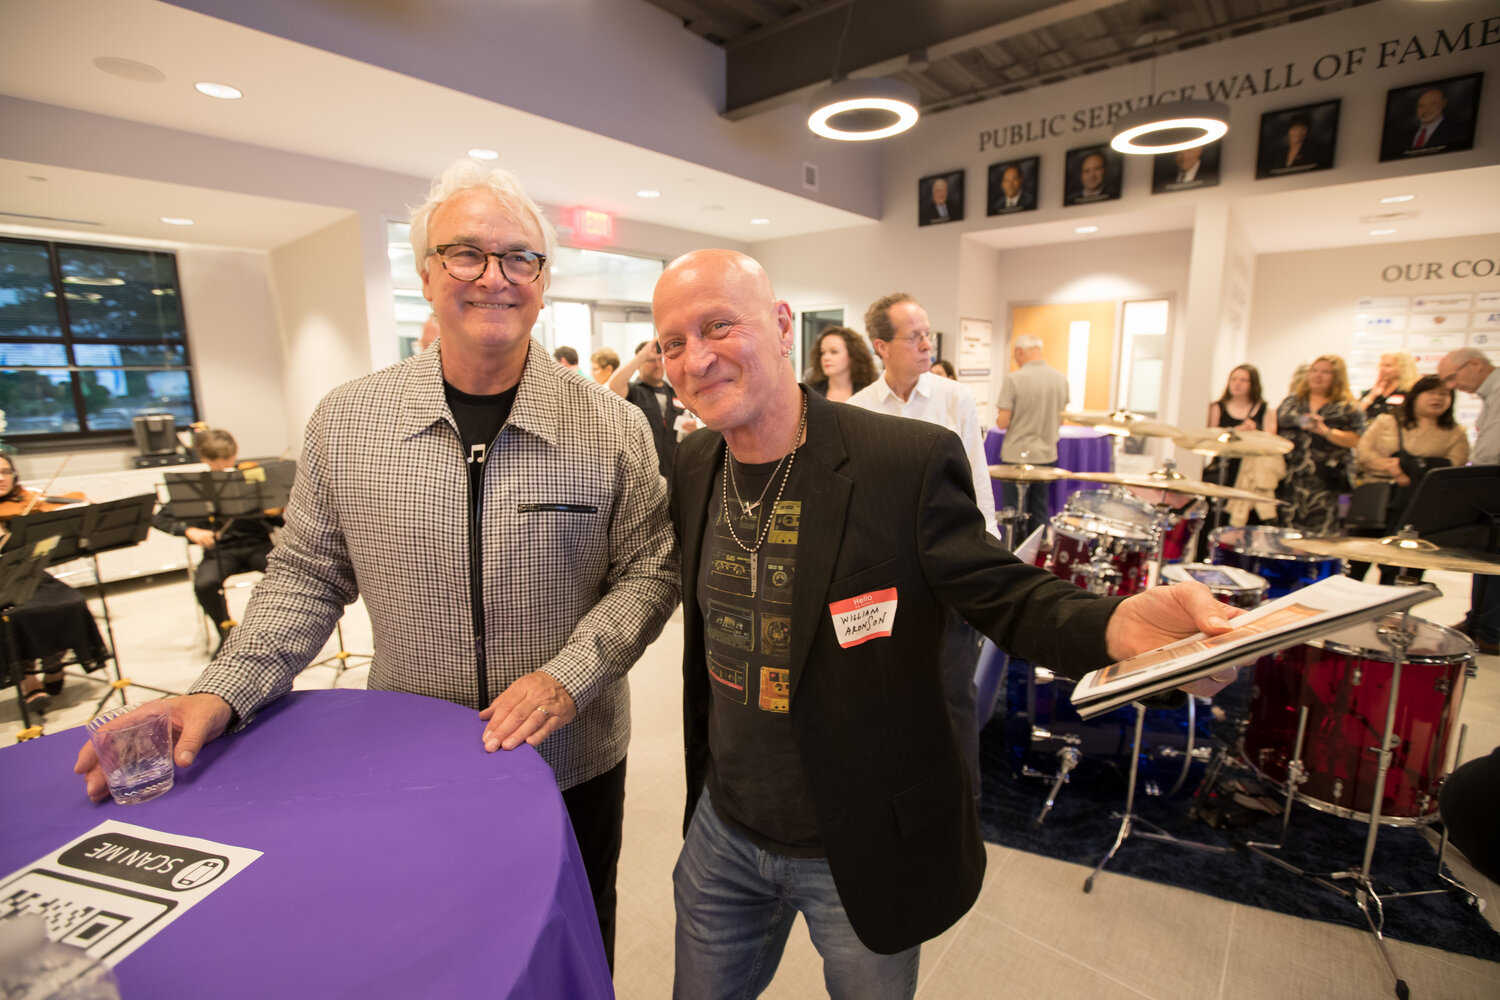 Doylestown musician Bill Aronson chats with The Bucks County Music project founder Richard Towey following the inaugural meeting held at the PA Biotech Center of Bucks County in Buckingham.